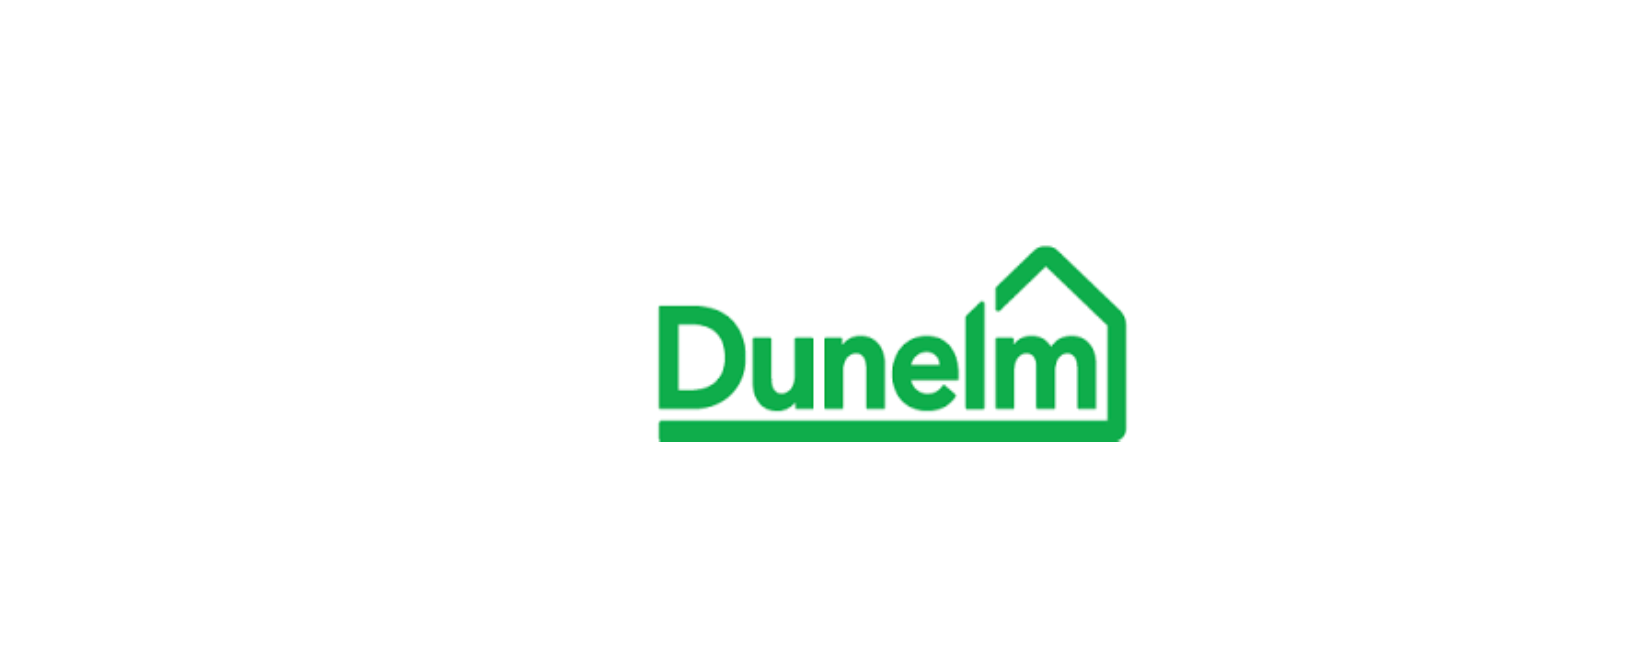 The Palace of Home Furnishing – Dunelm Review